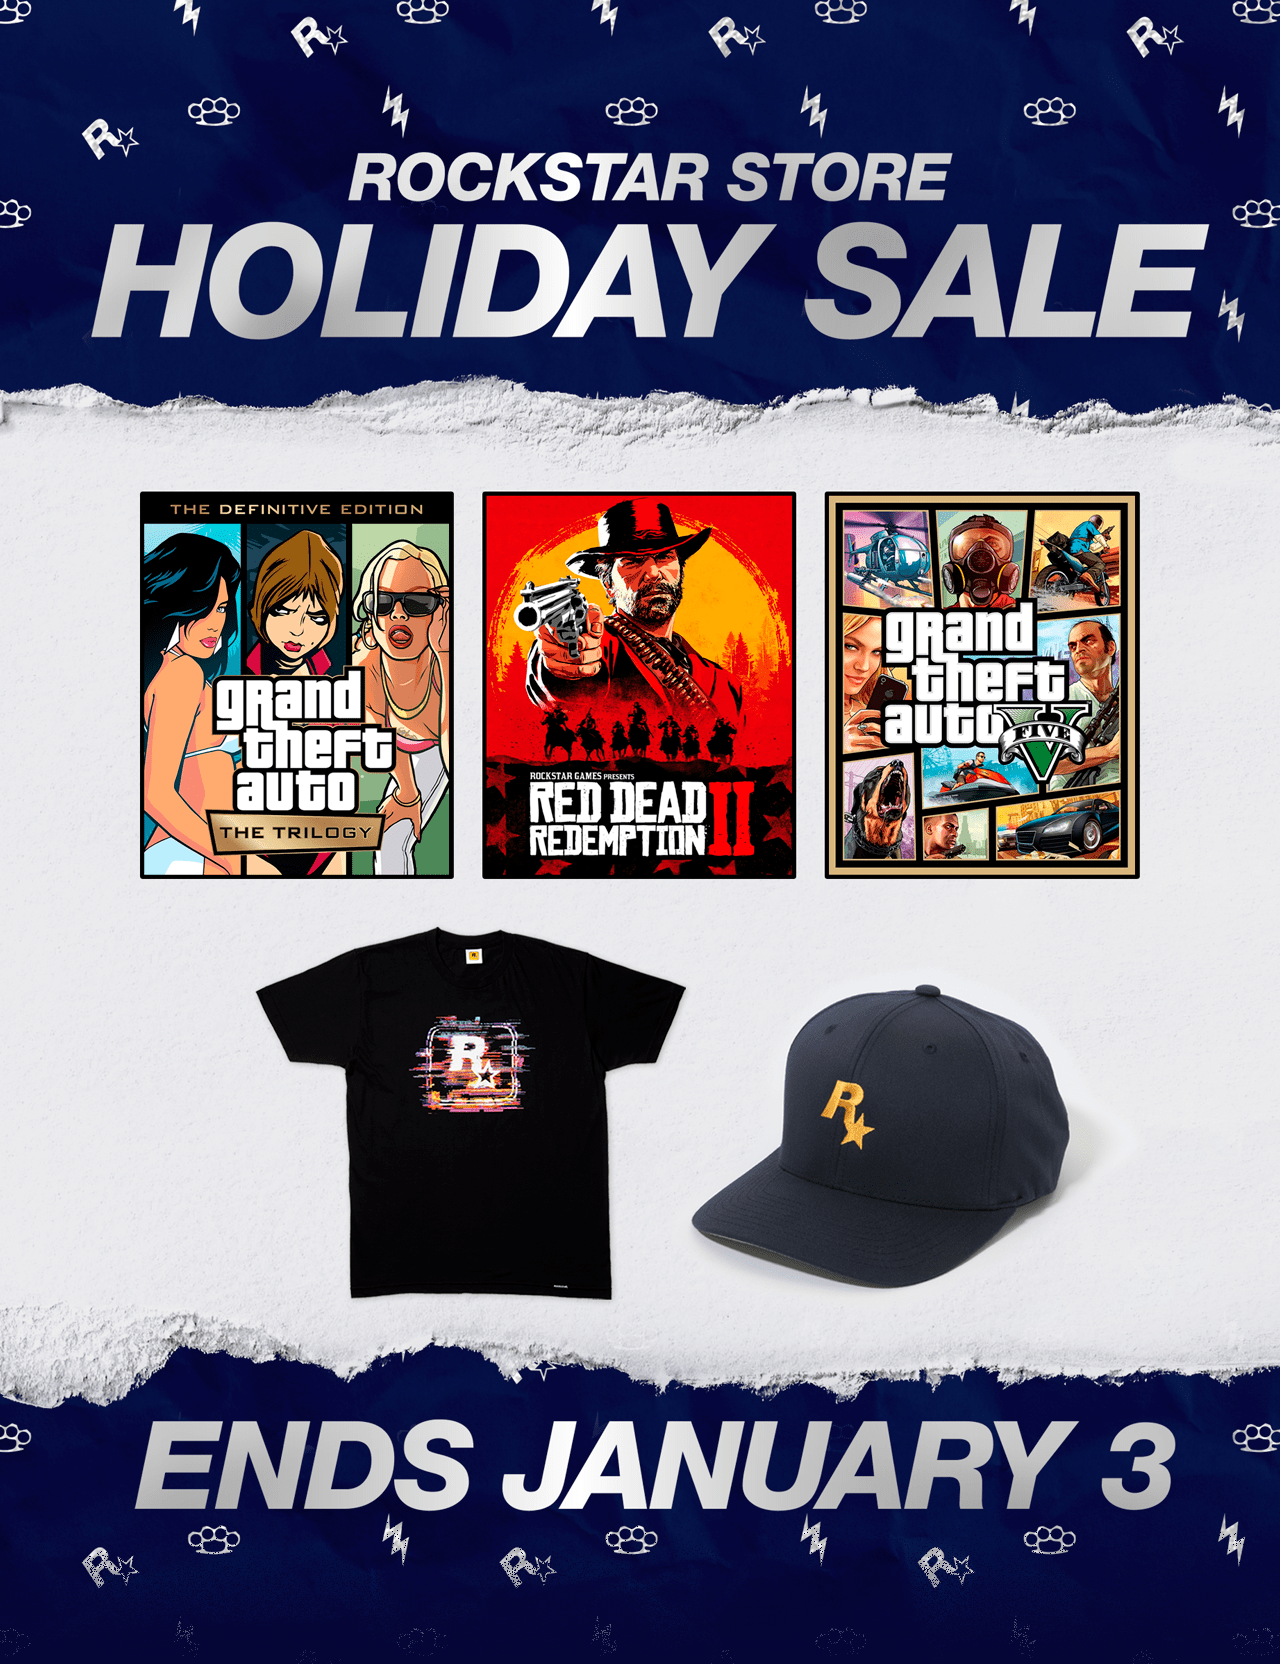 The Rockstar Holiday Sale Flyer, featuring GTA Trilogy, Red Dead Redemption 2, Grand Theft Auto V, and assorted apparel -- Ends January 3